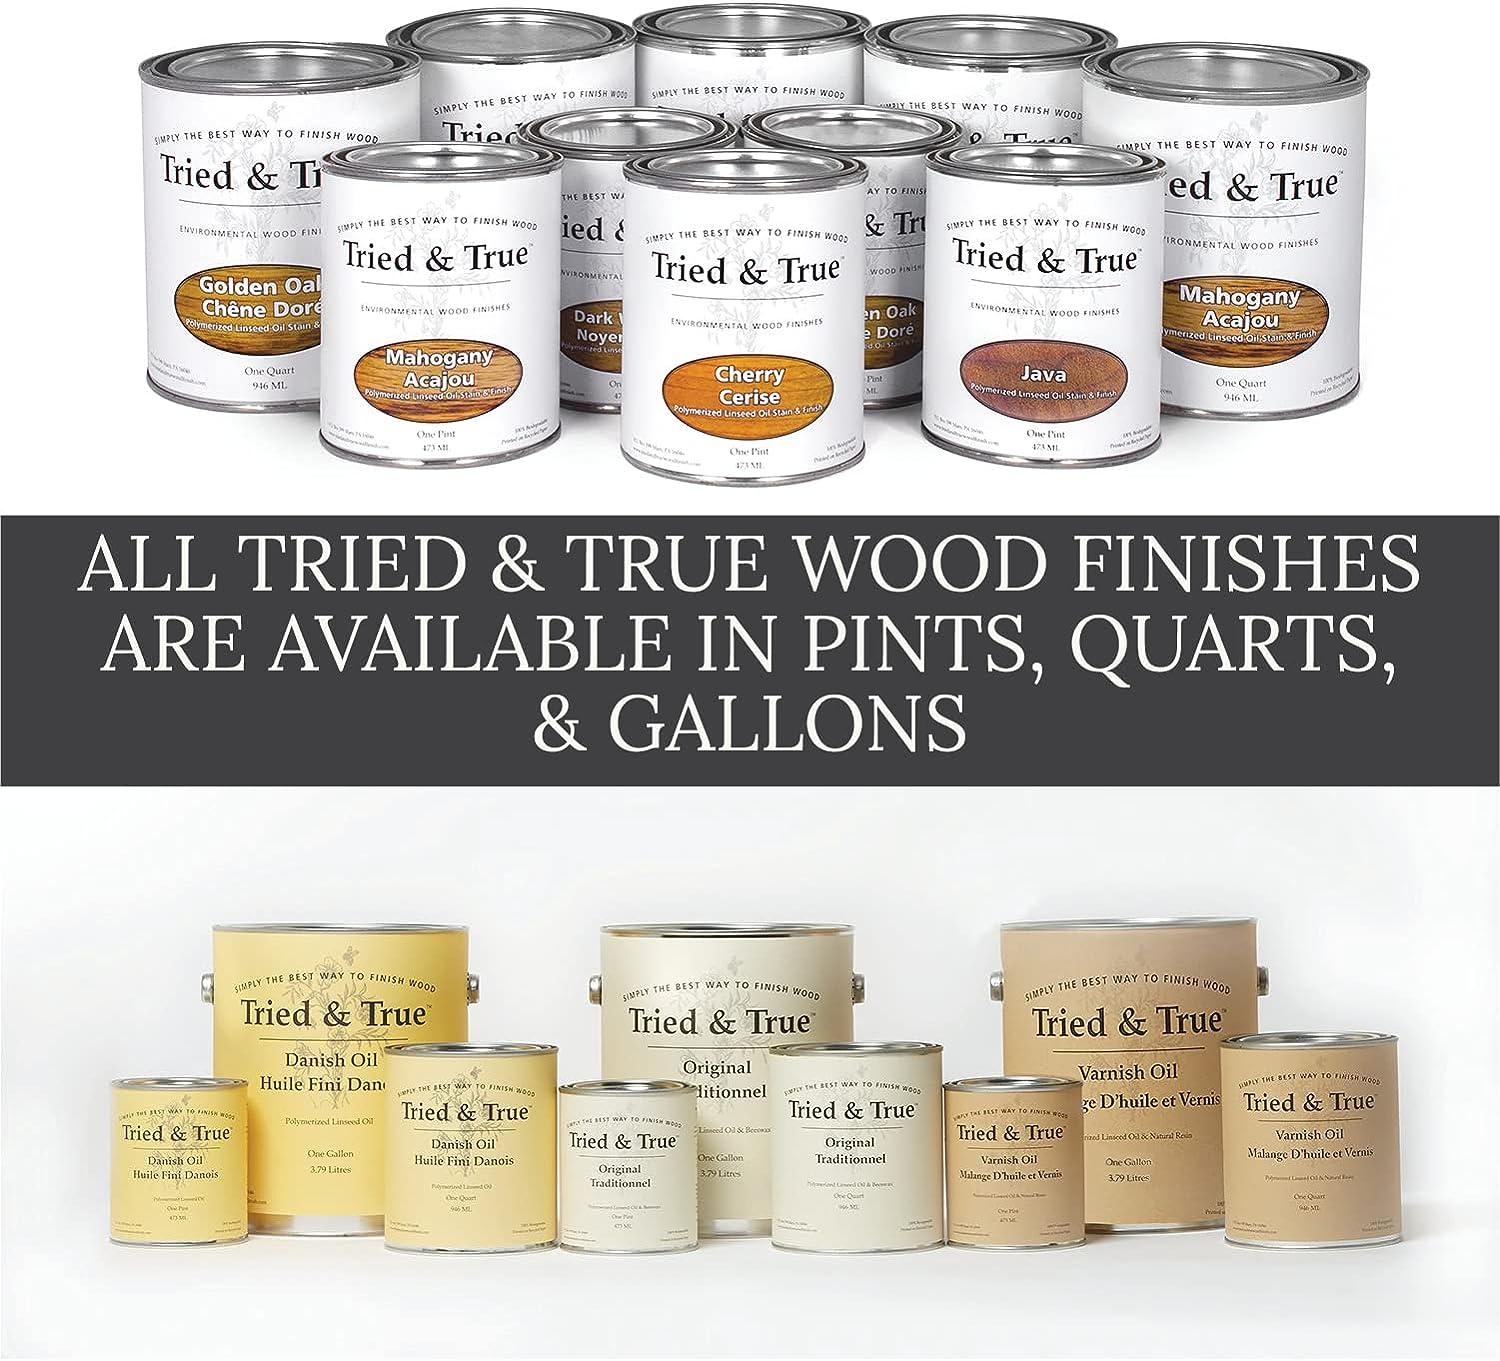 Tried & True Danish Oil Quart All Natural, All Purpose Finish for Wood,  Metal, Food Safe, Solvent Free, VOC Free, Non Toxic Wood Finish,  Polymerized Linseed Oil, Stand Oil Other Quart